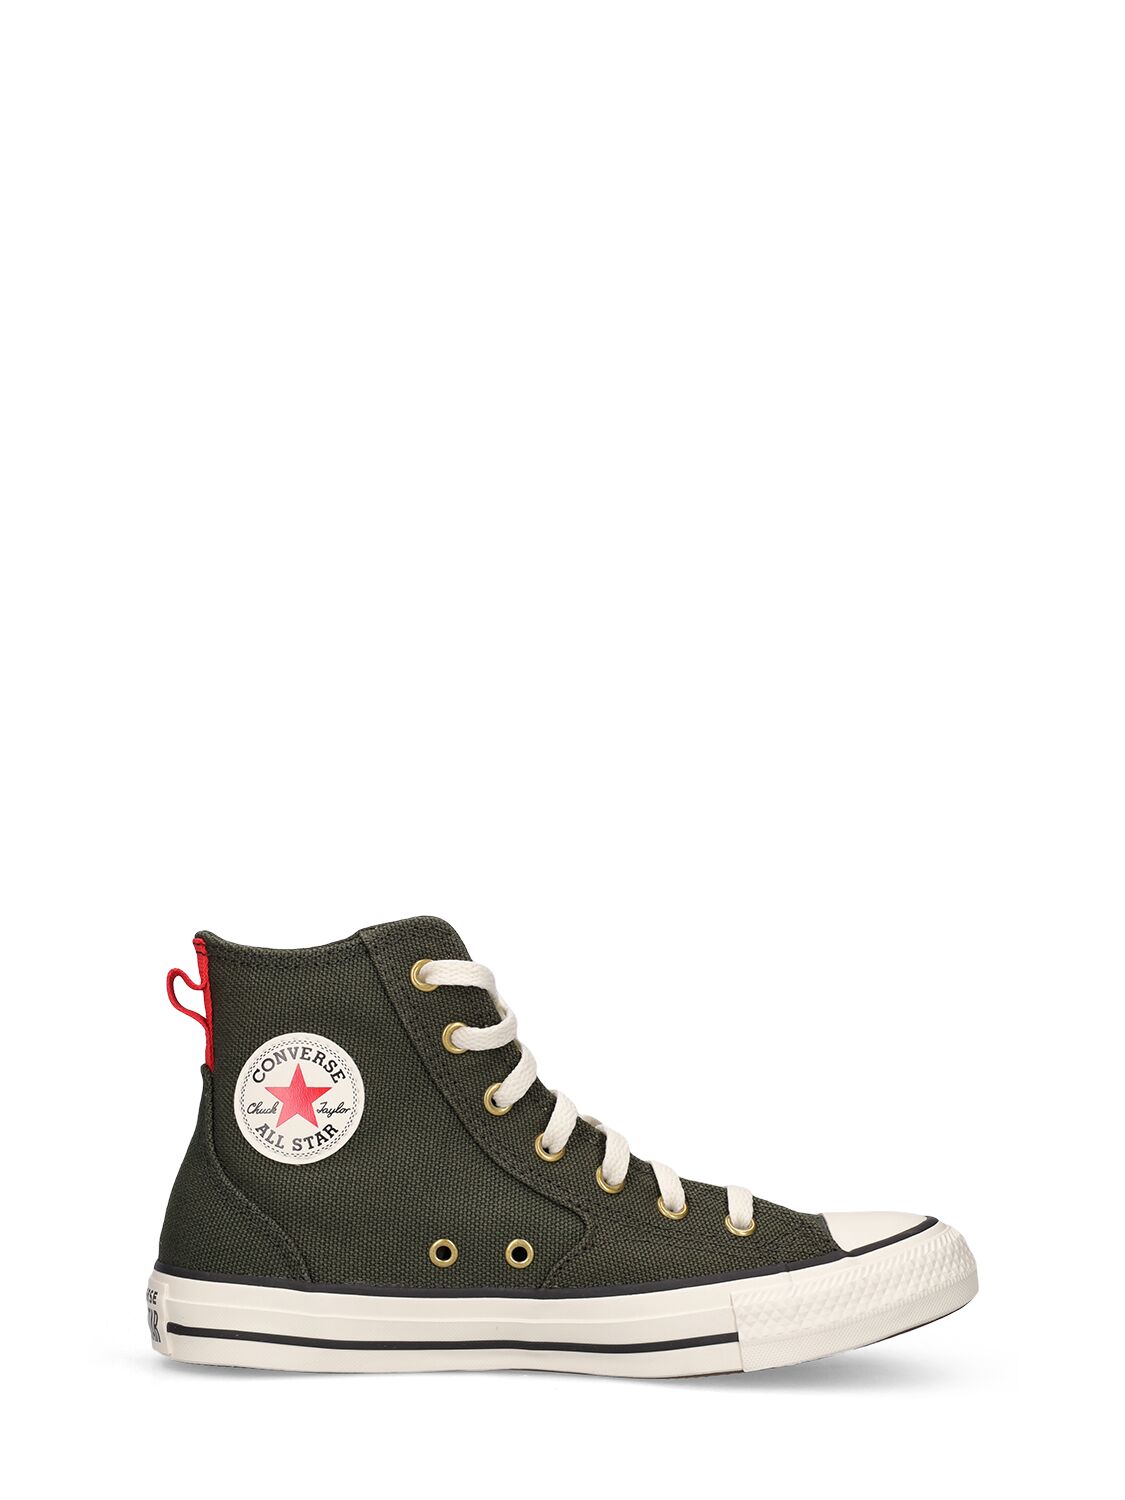 Flame Printed Lace-up High Sneakers - CONVERSE - Modalova